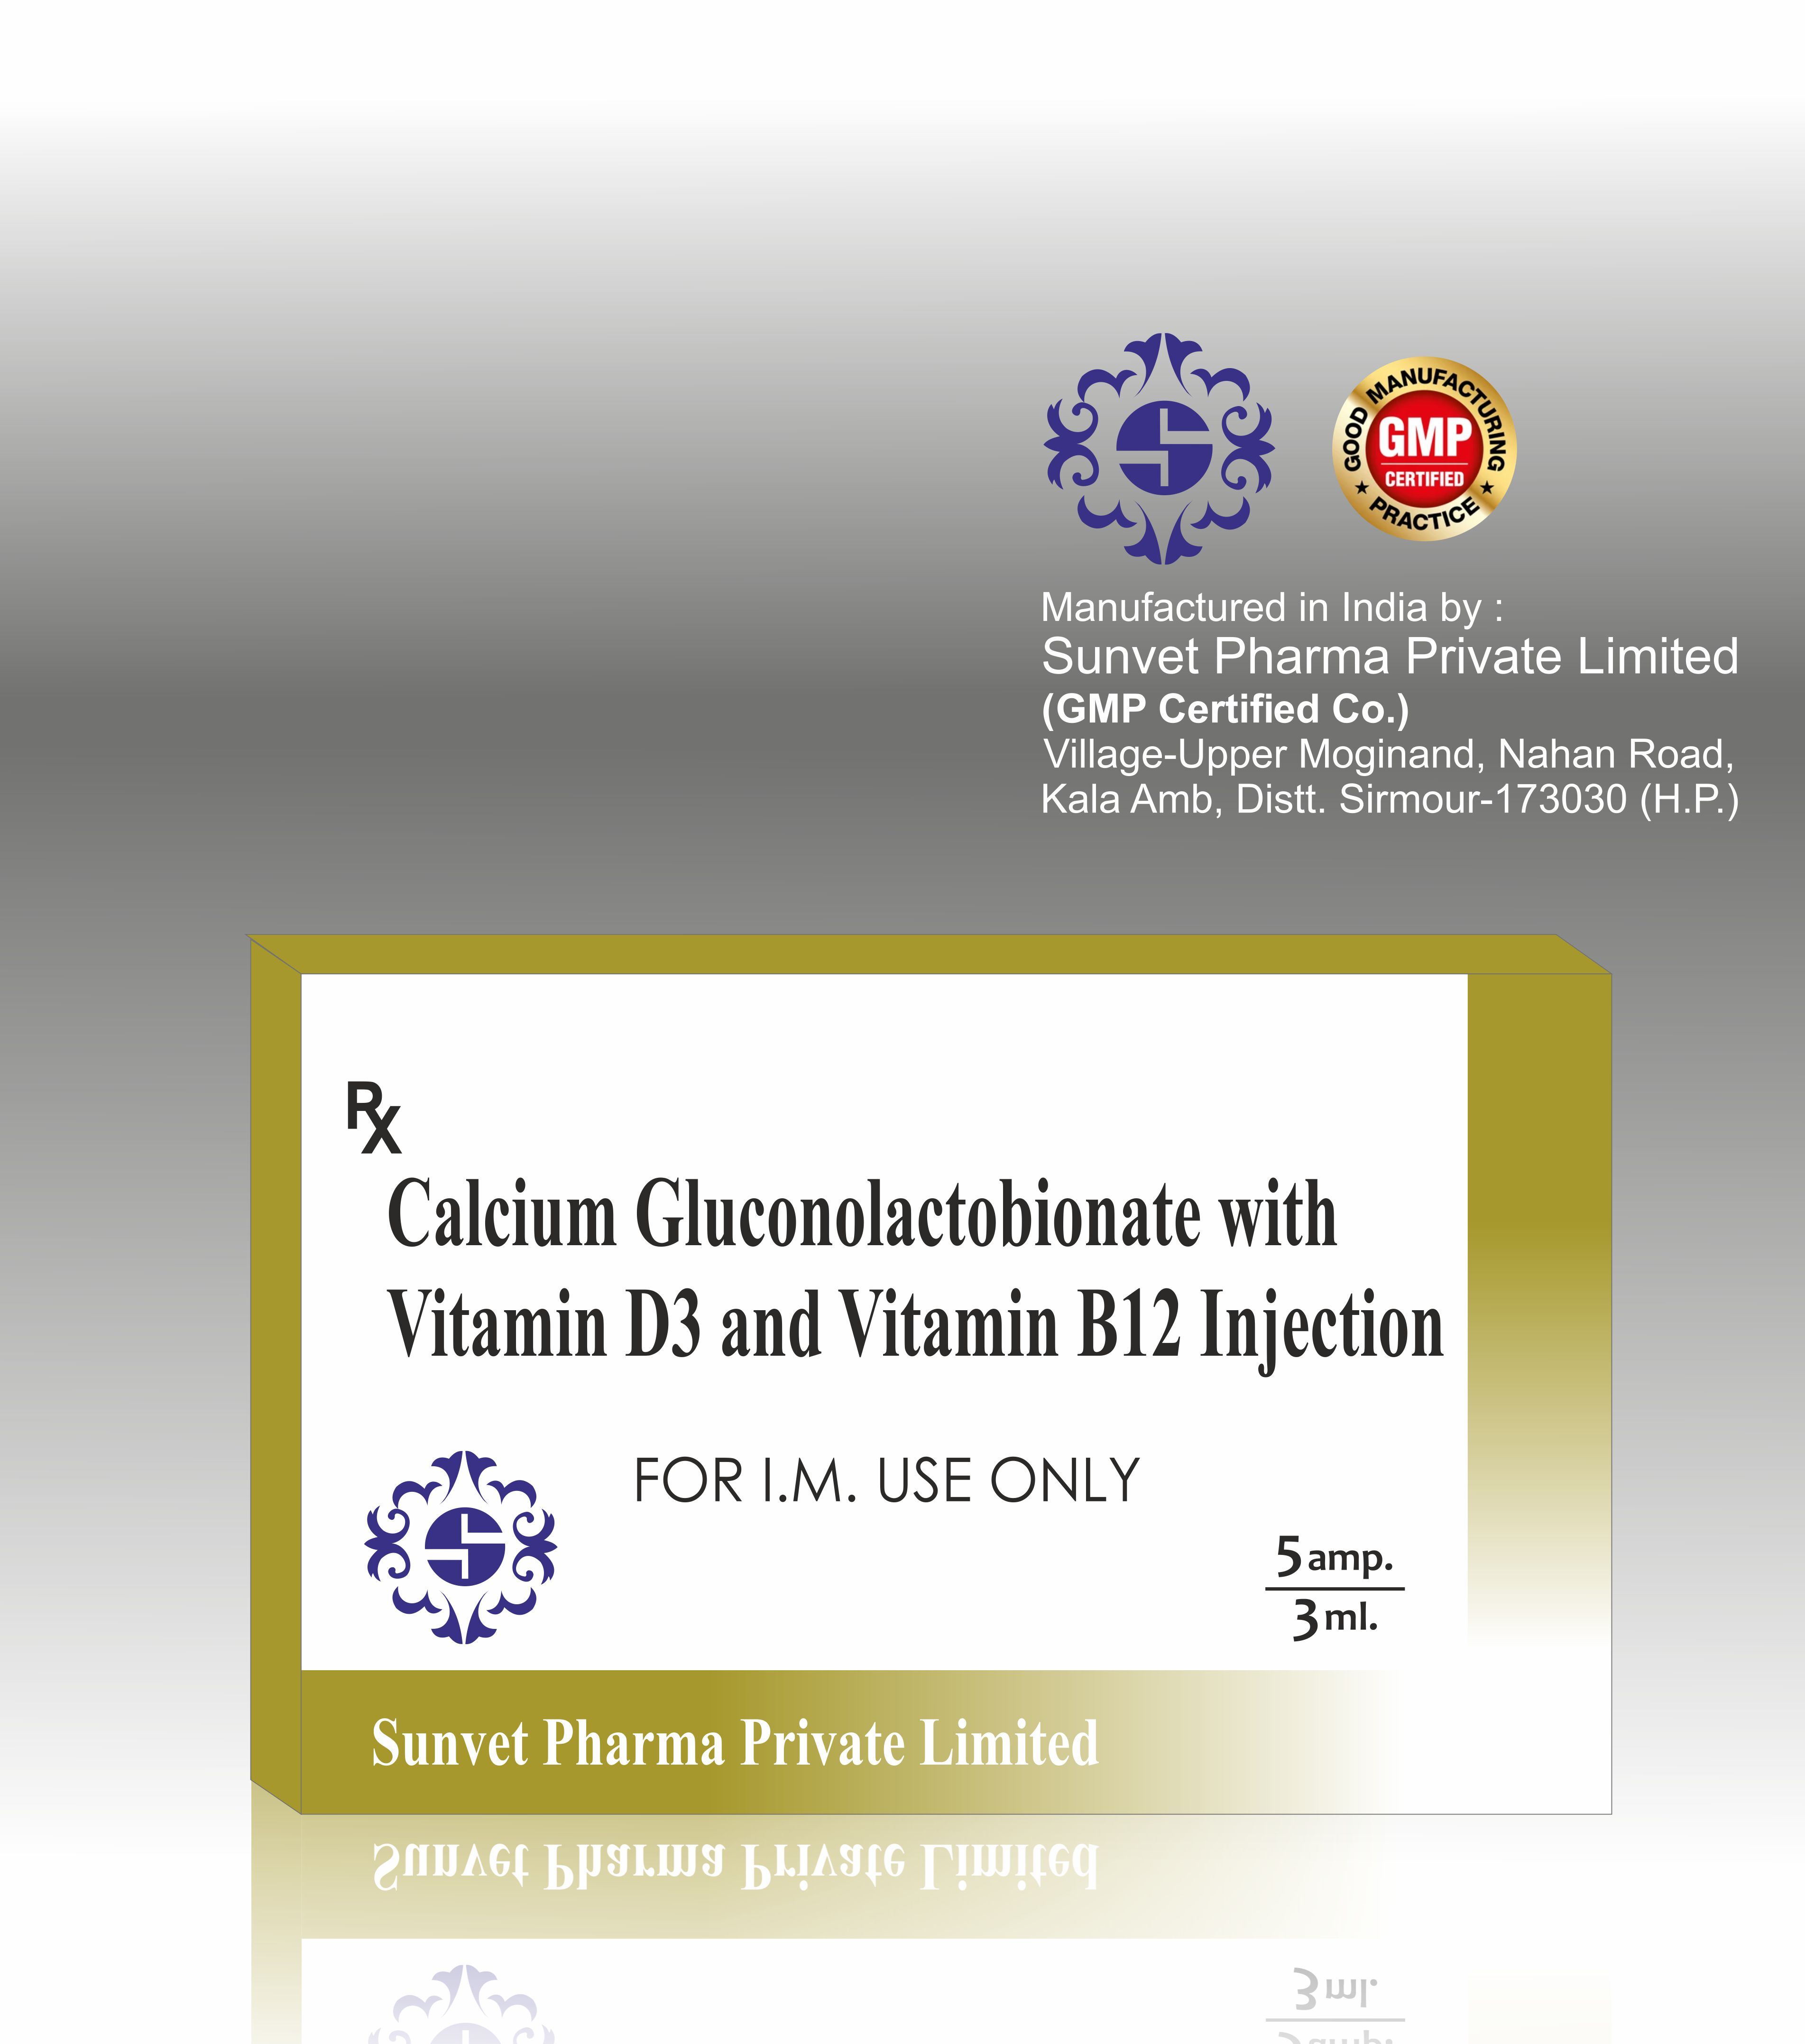 Cefoperazone with Sulbactam Injection In Third Party Manufacturing